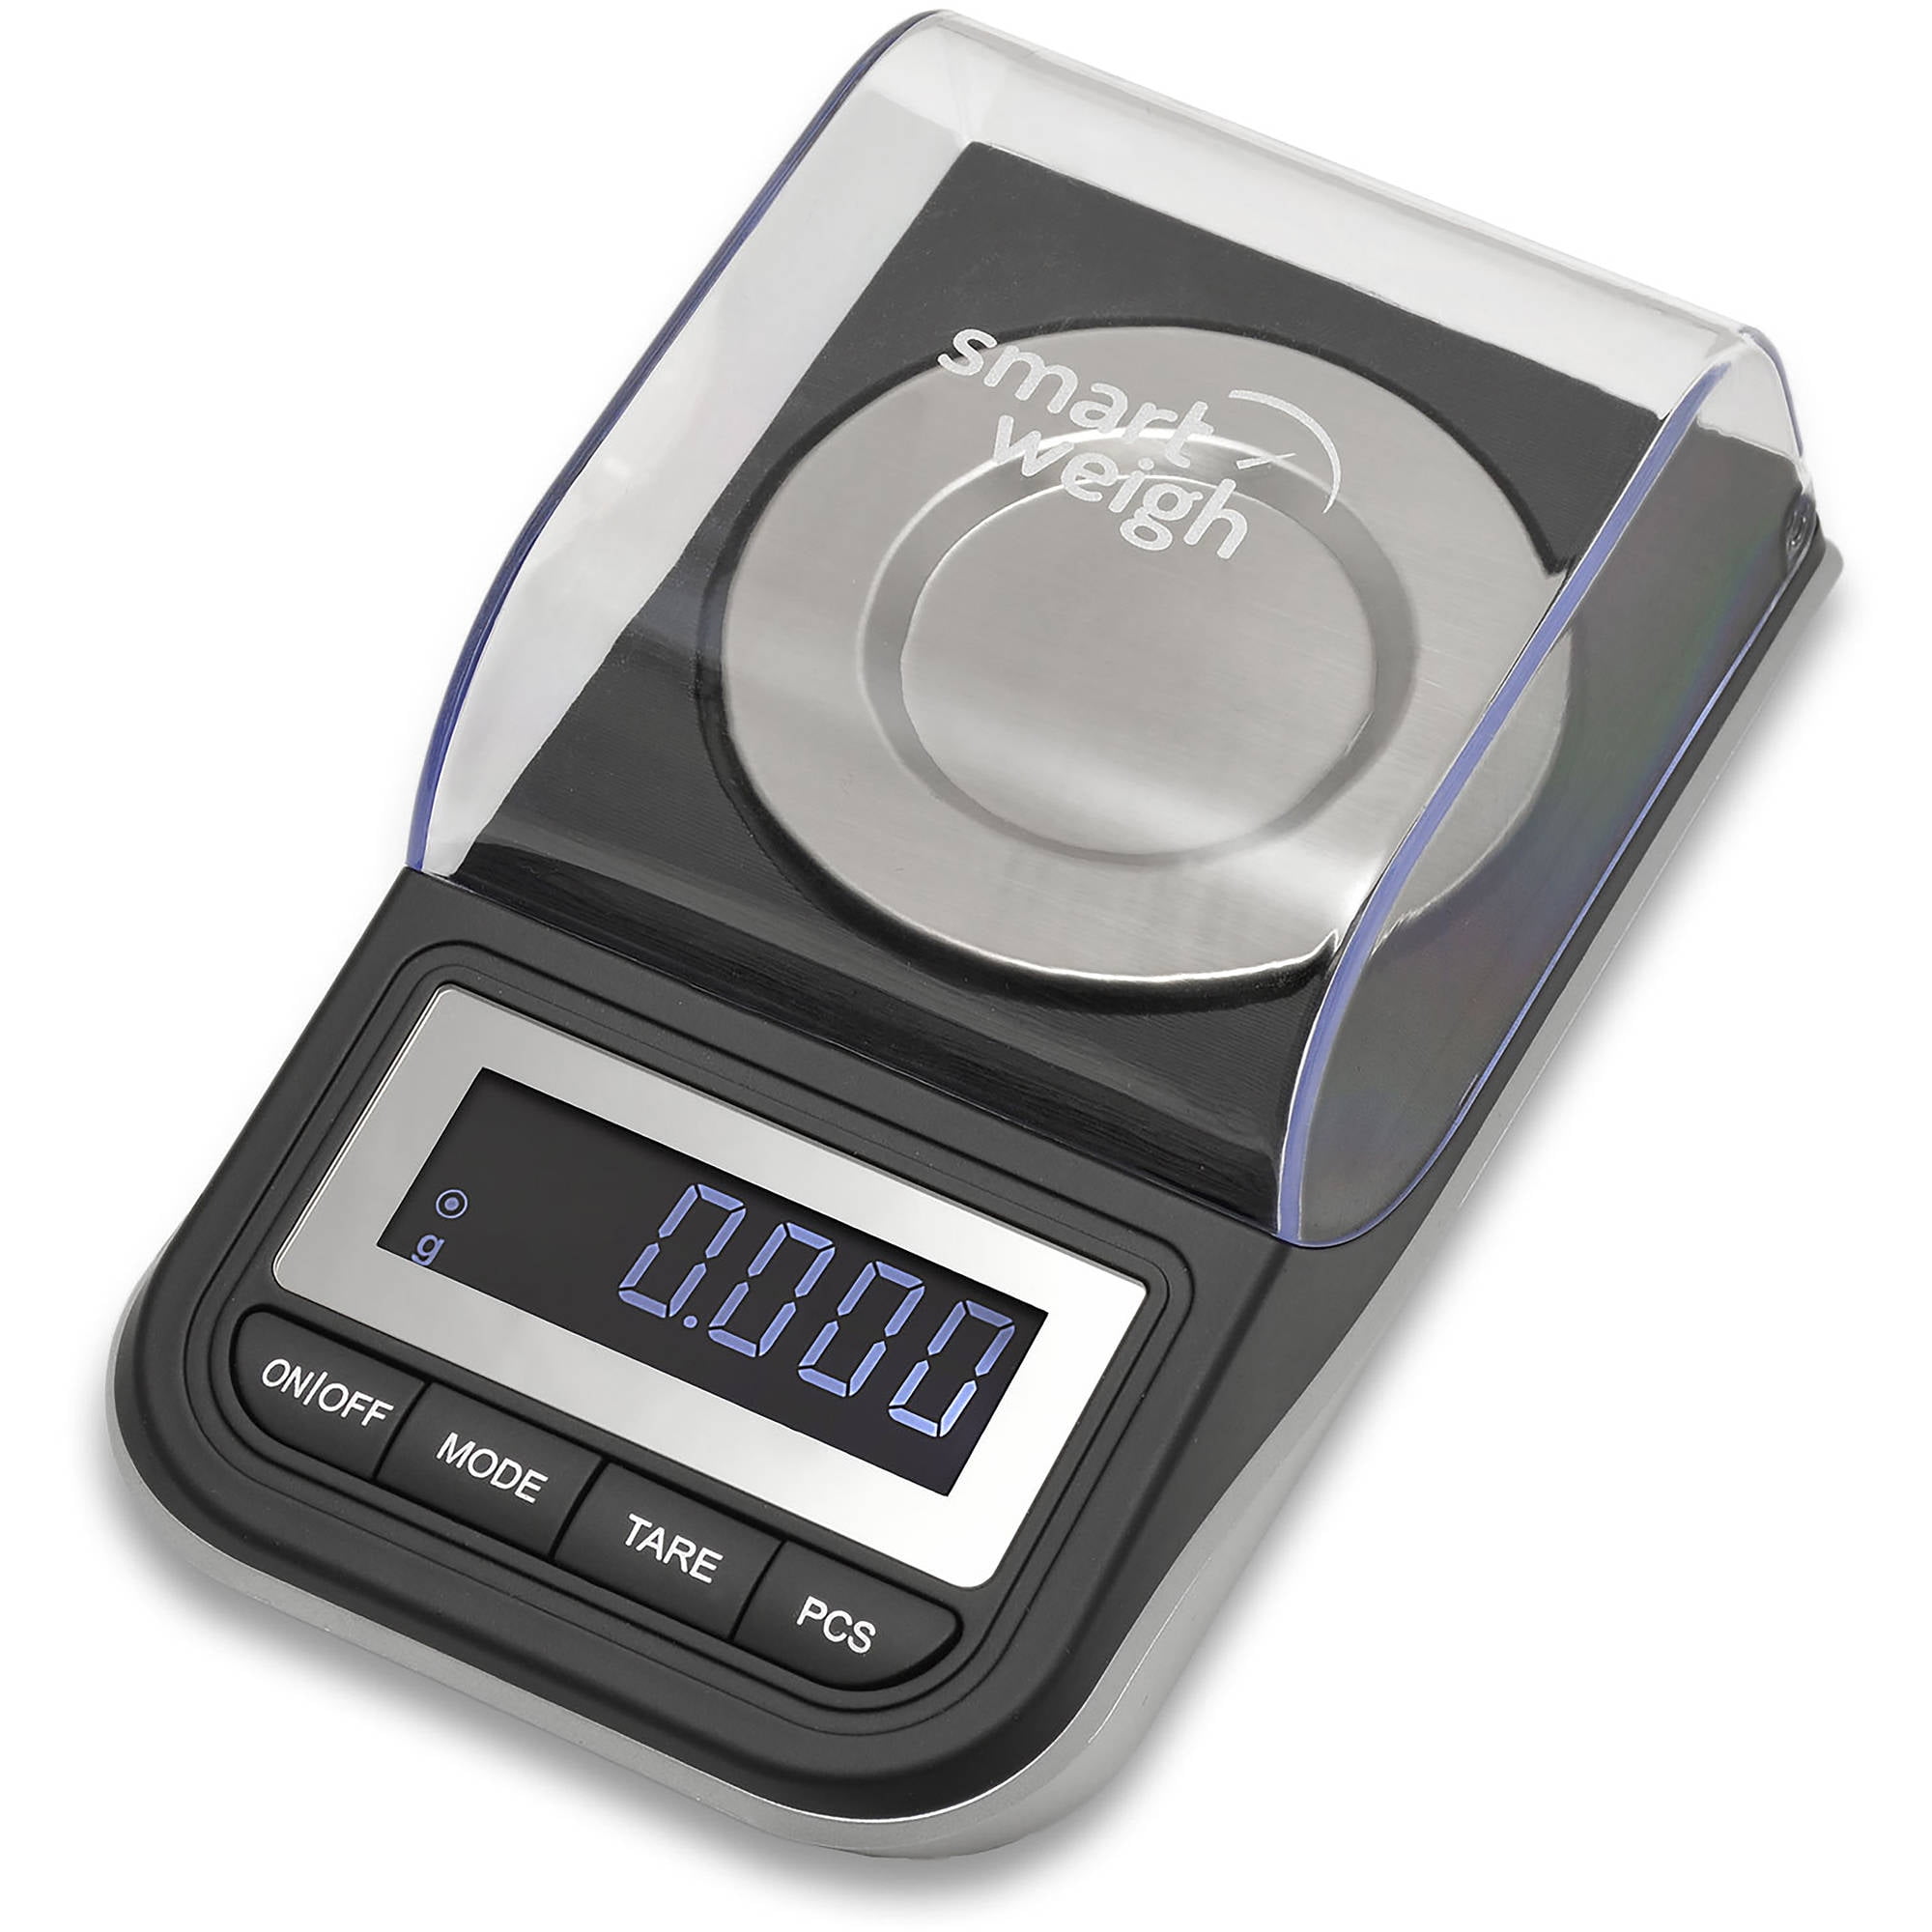  Smart Weigh: All Scales